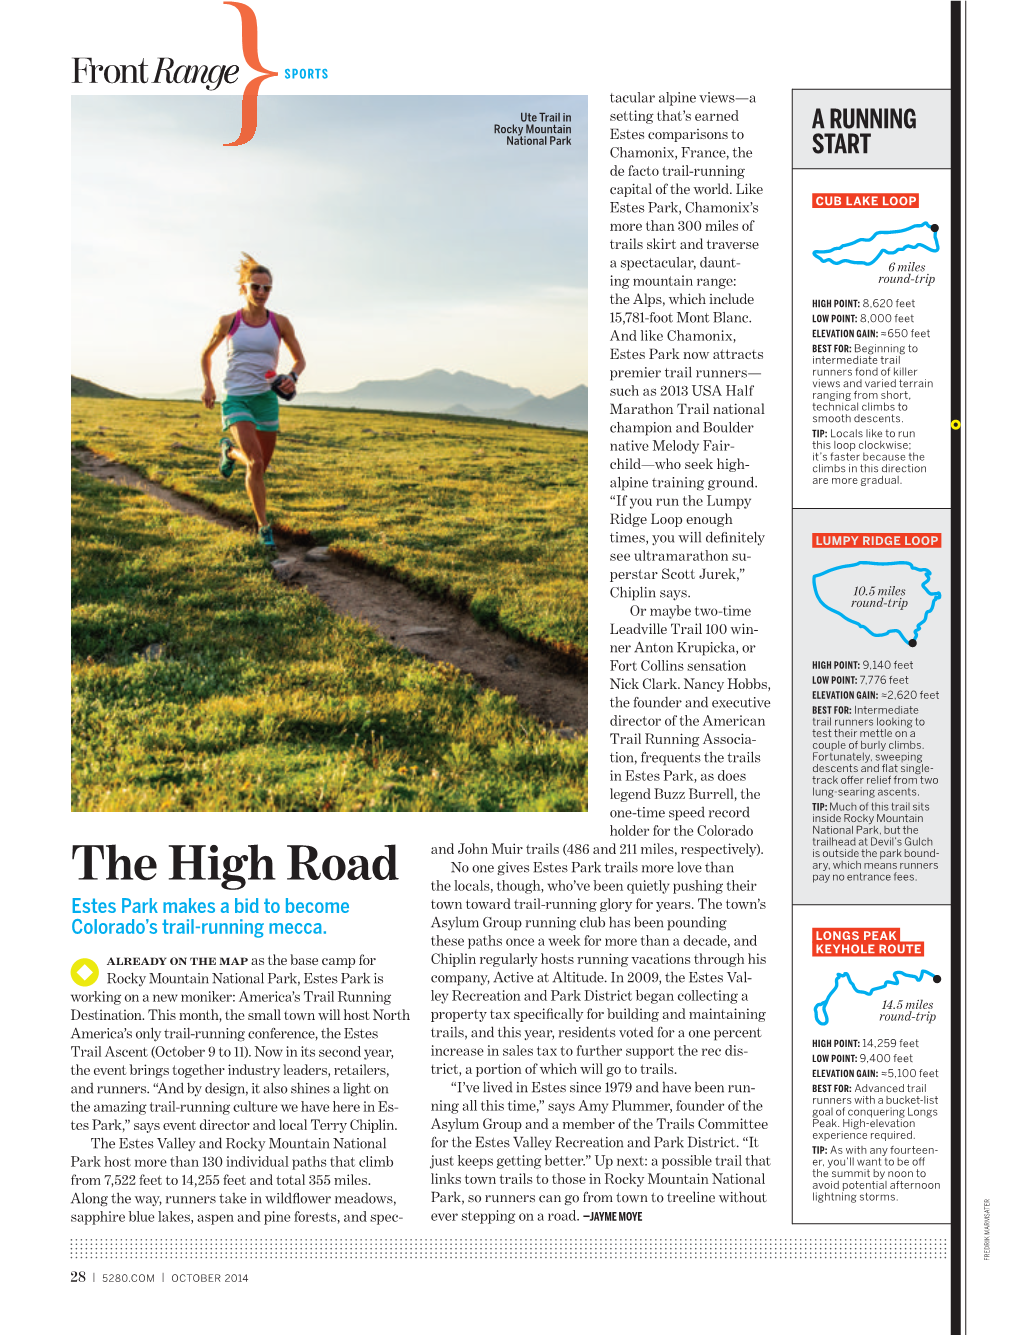 The High Road the Locals, Though, Who’Ve Been Quietly Pushing Their Estes Park Makes a Bid to Become Town Toward Trail-Running Glory for Years